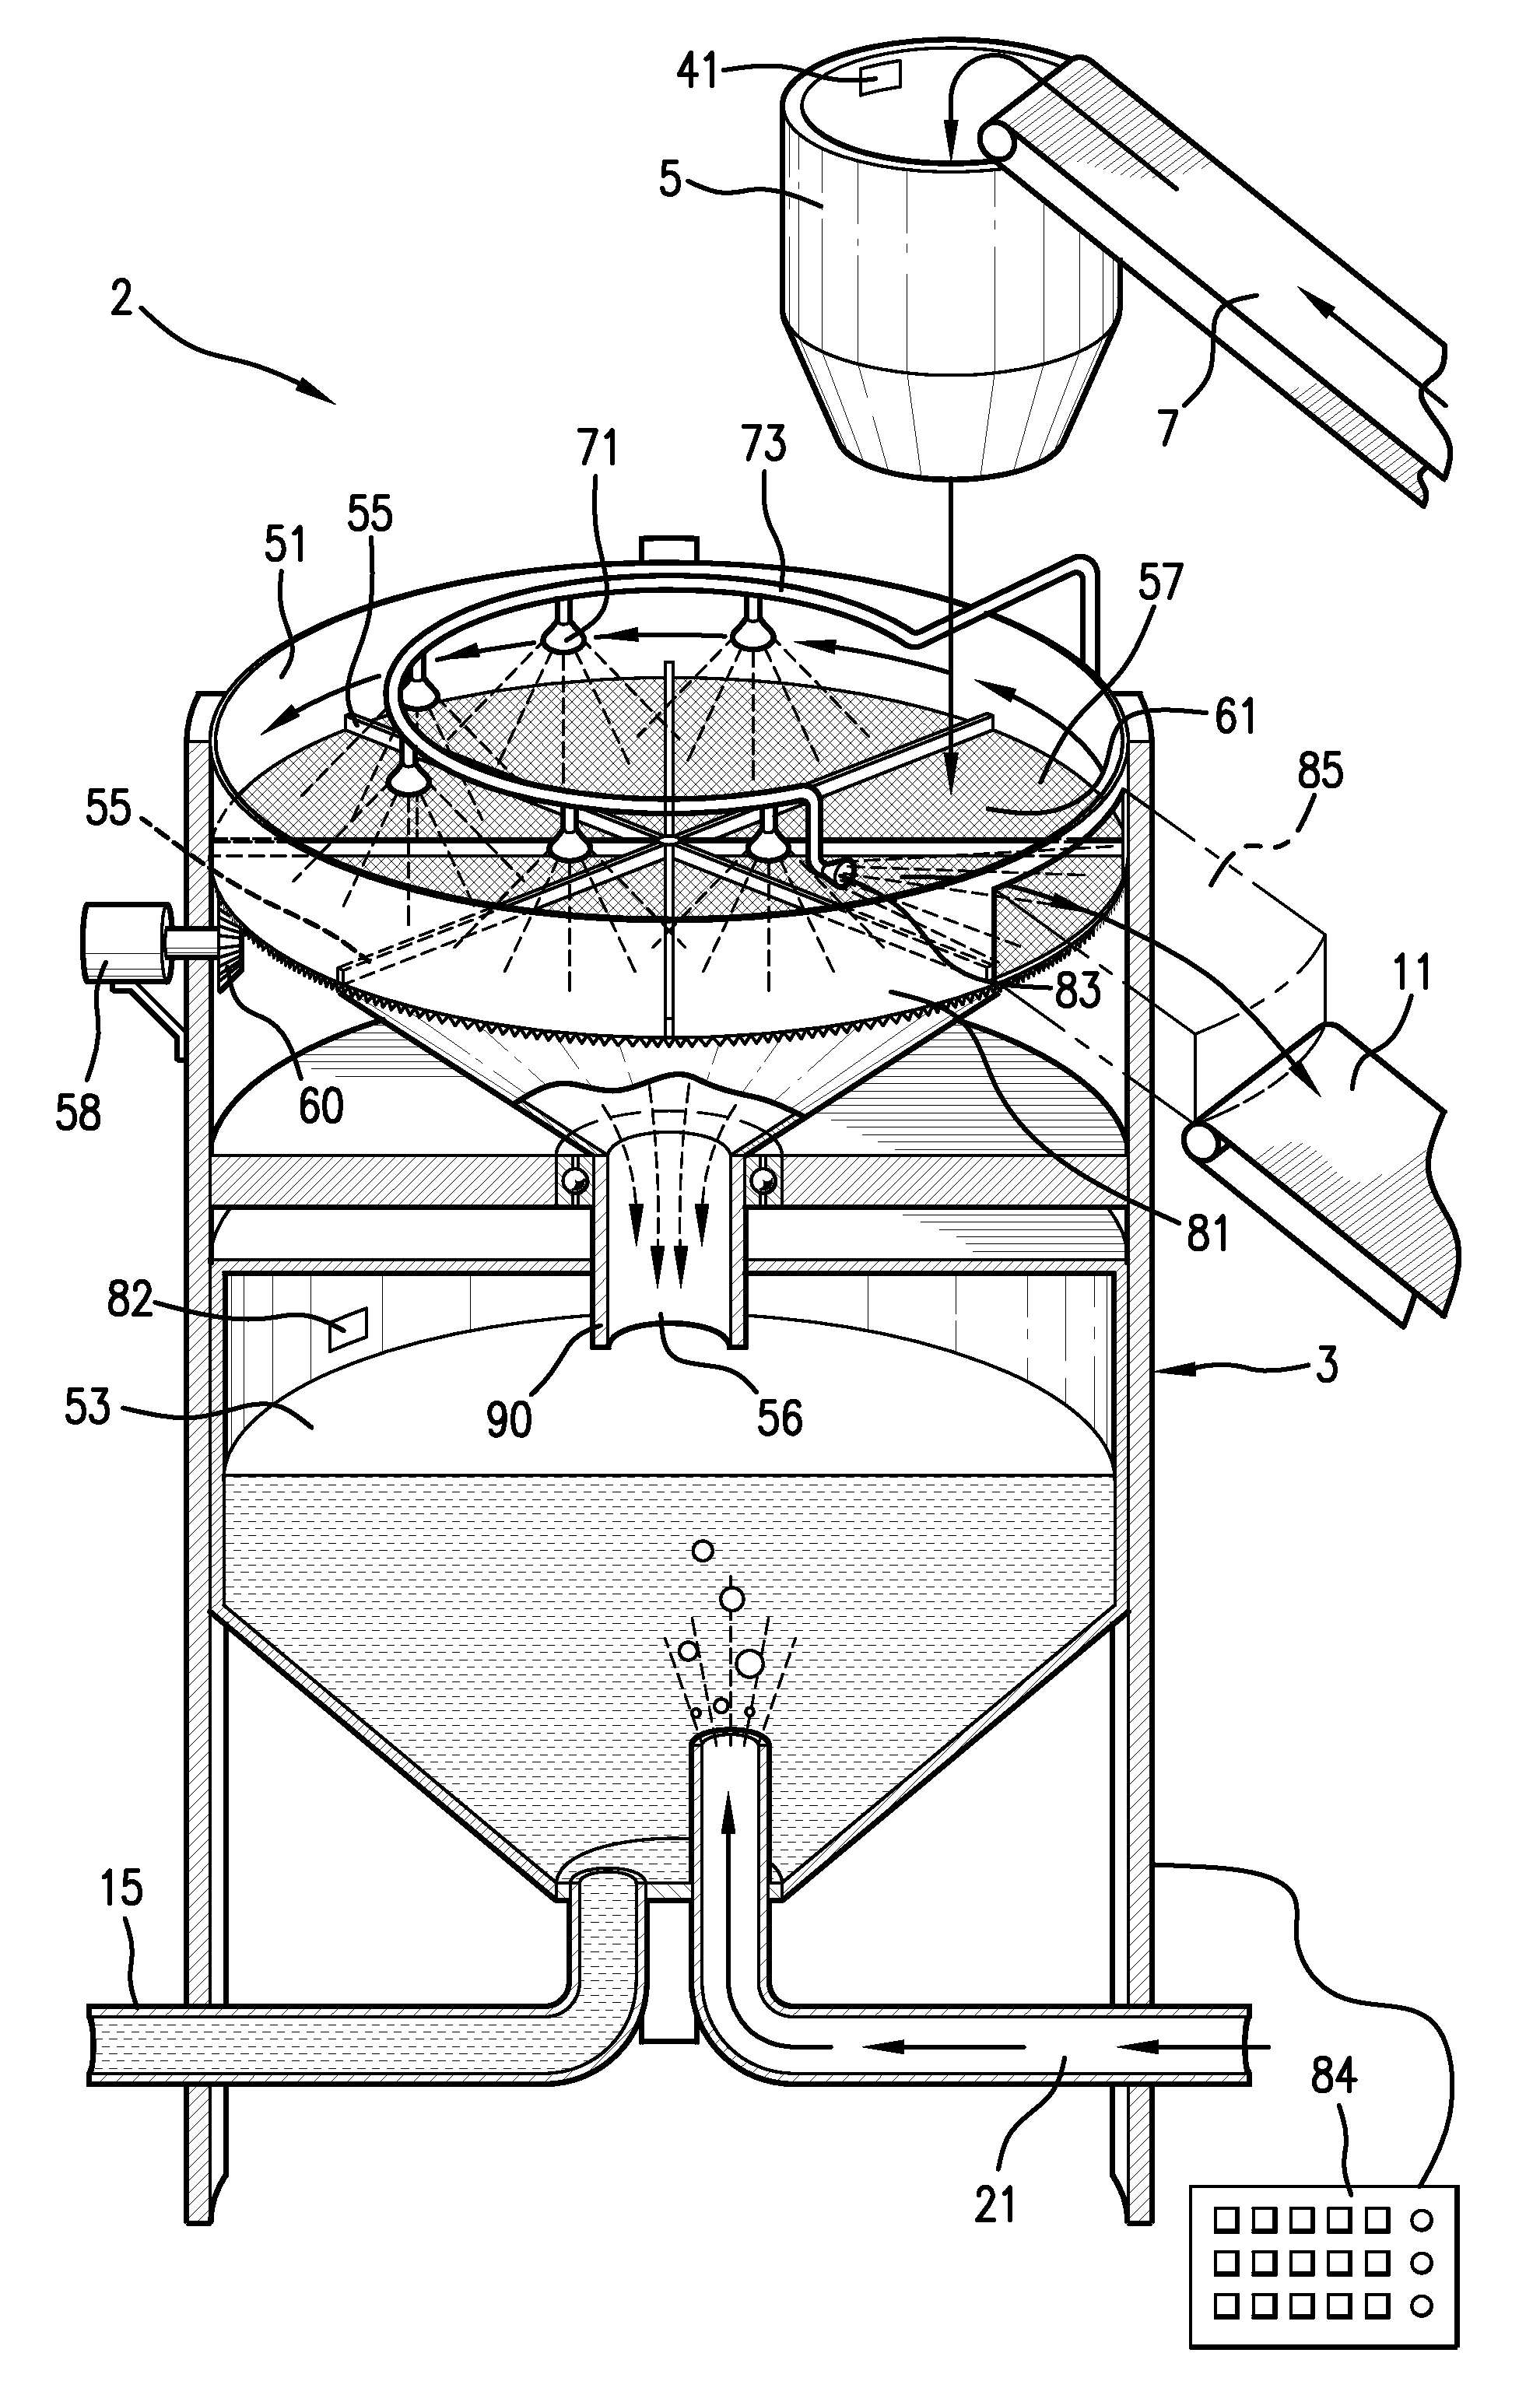 System and method for making liquid compost